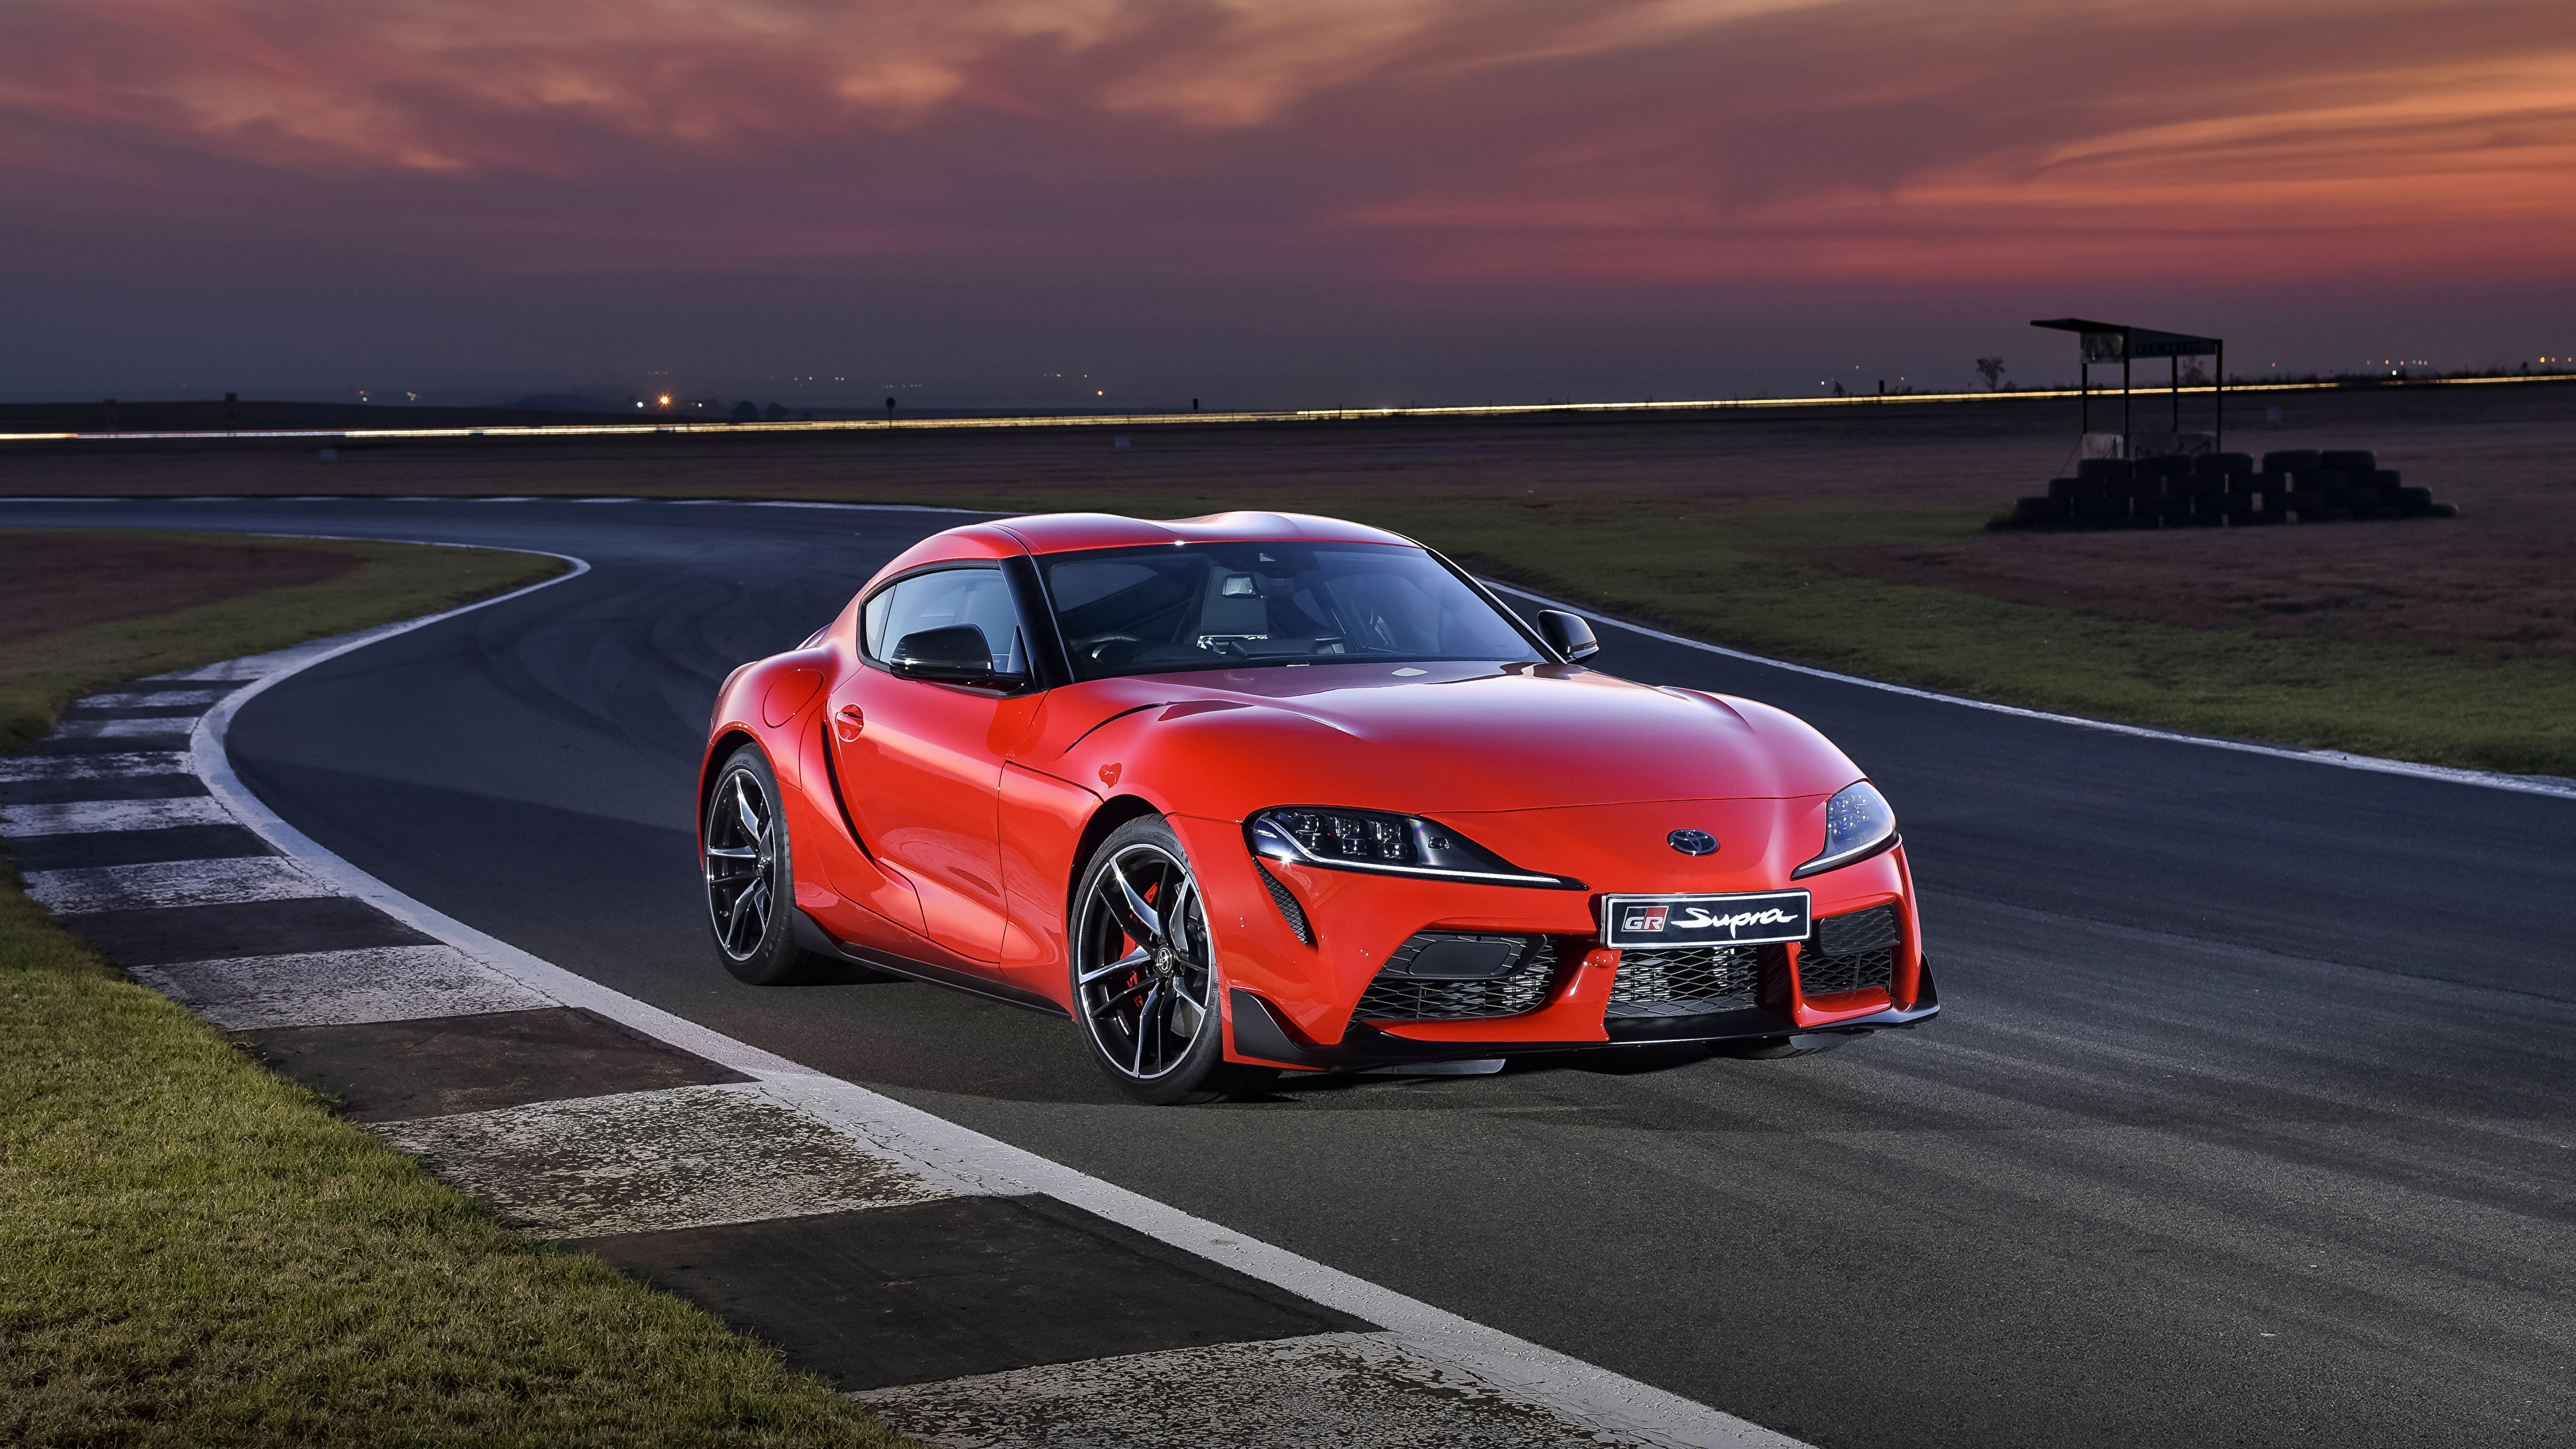 Picture Toyota 19 Gr Supra Red Cars Metallic 3840x2160